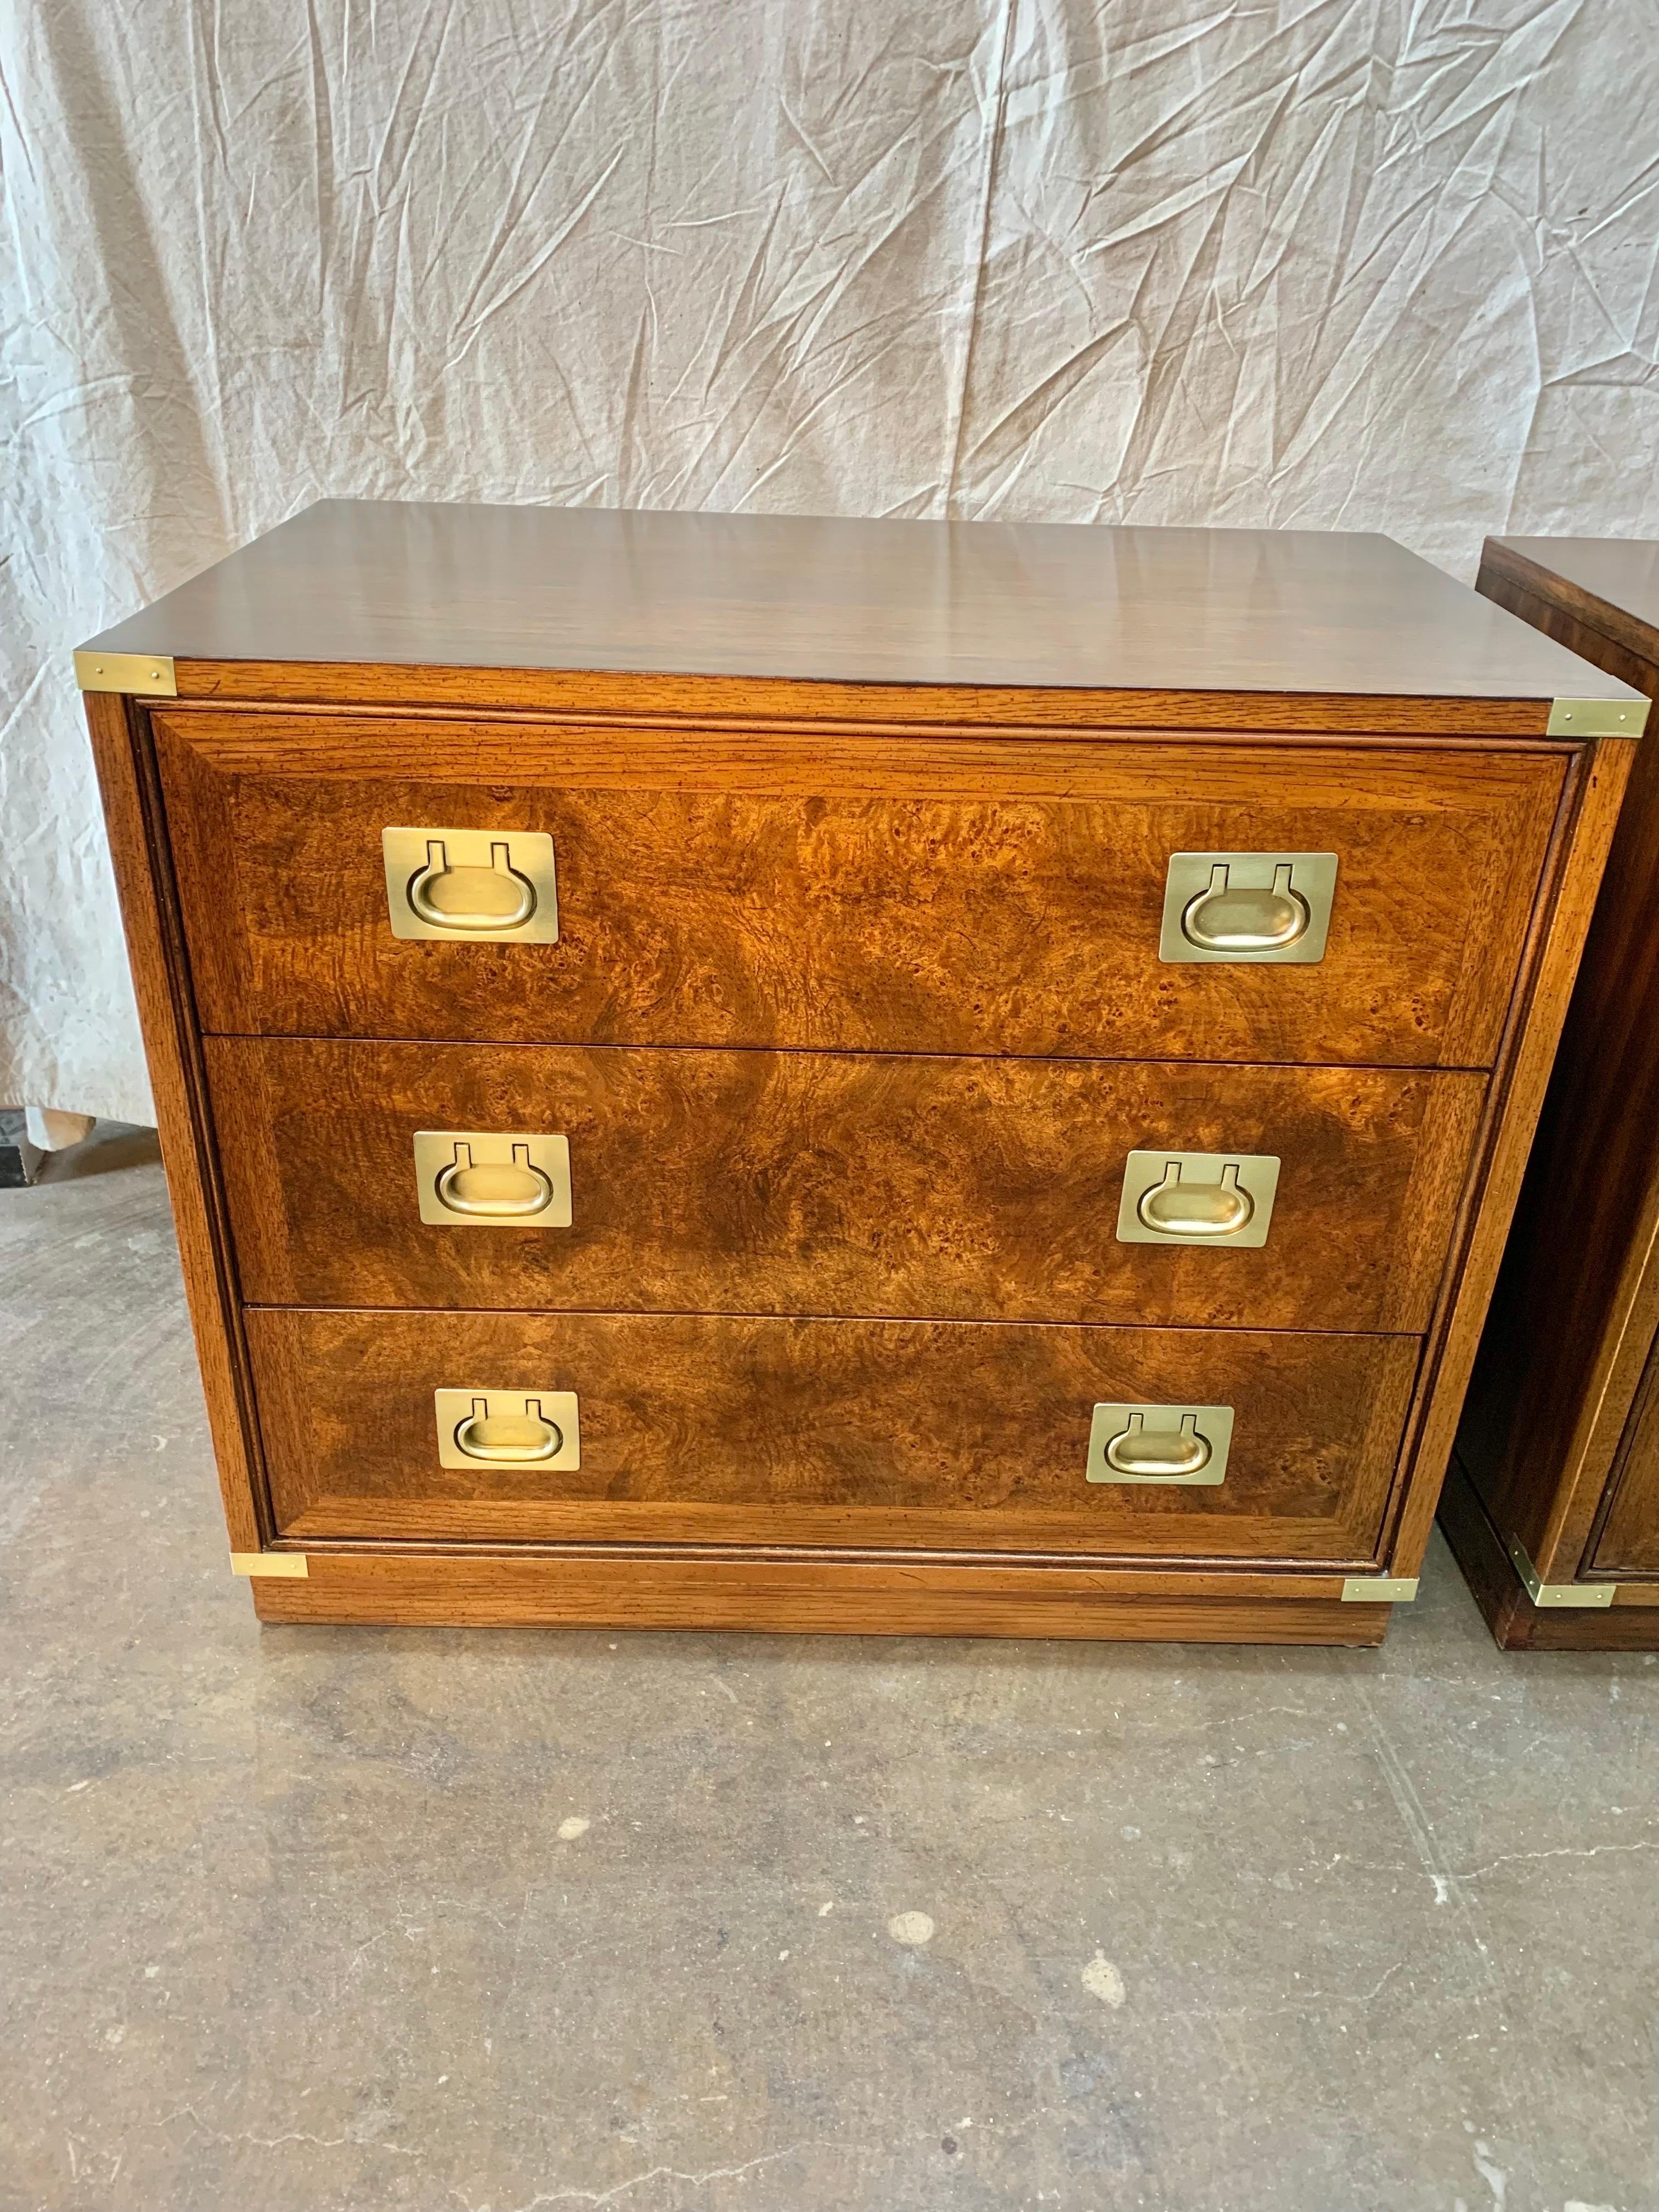 Mid 20th C. Walnut, Burlwood and Brass Campaign Style Bachelor Chests - a Pair 1